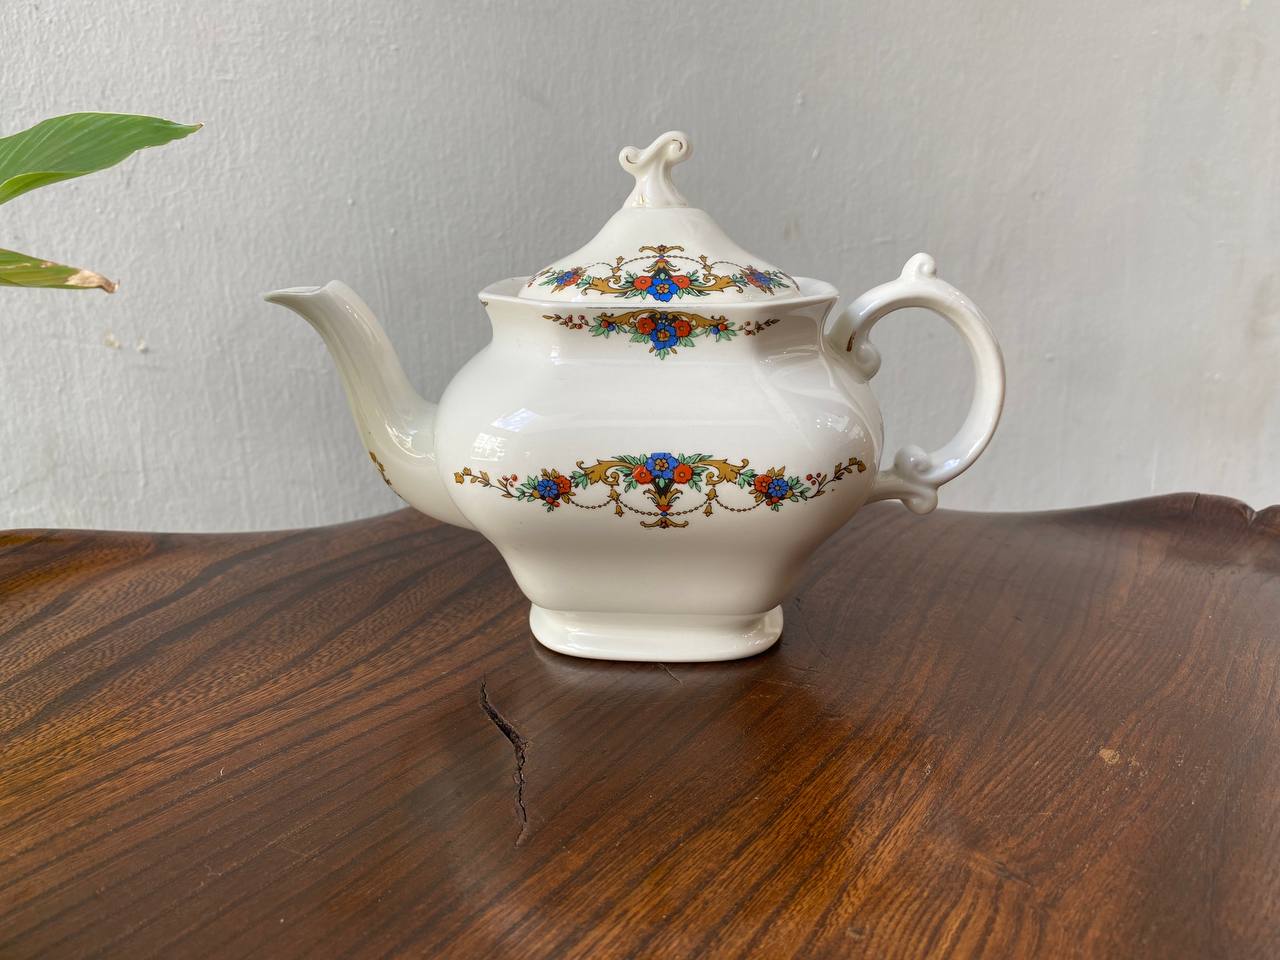 Teapot by Alfred Meakin